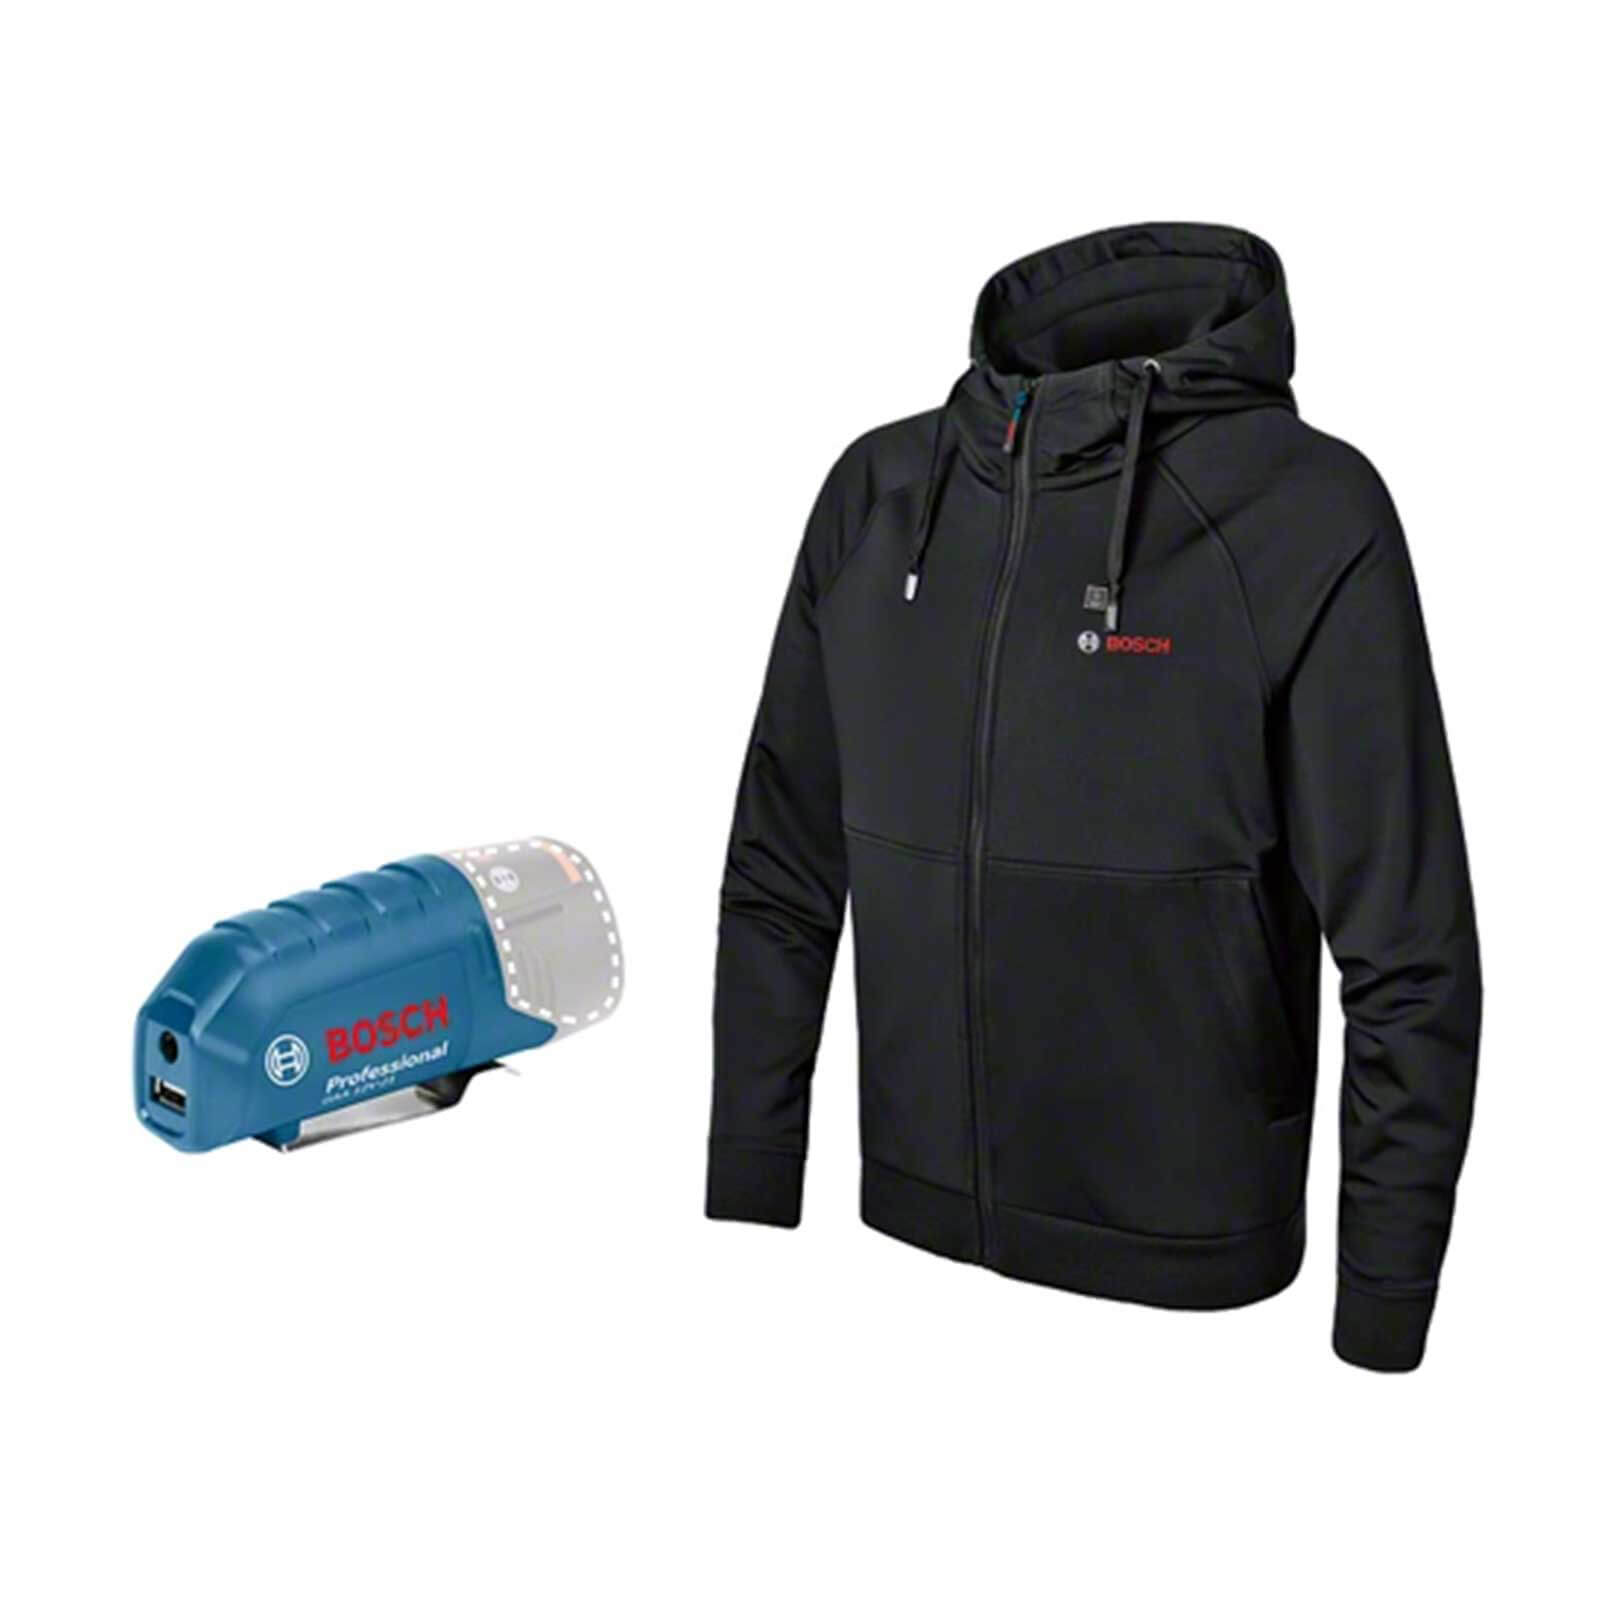 Image of Bosch GHH 12-18V Battery Heated Hoodie Black S